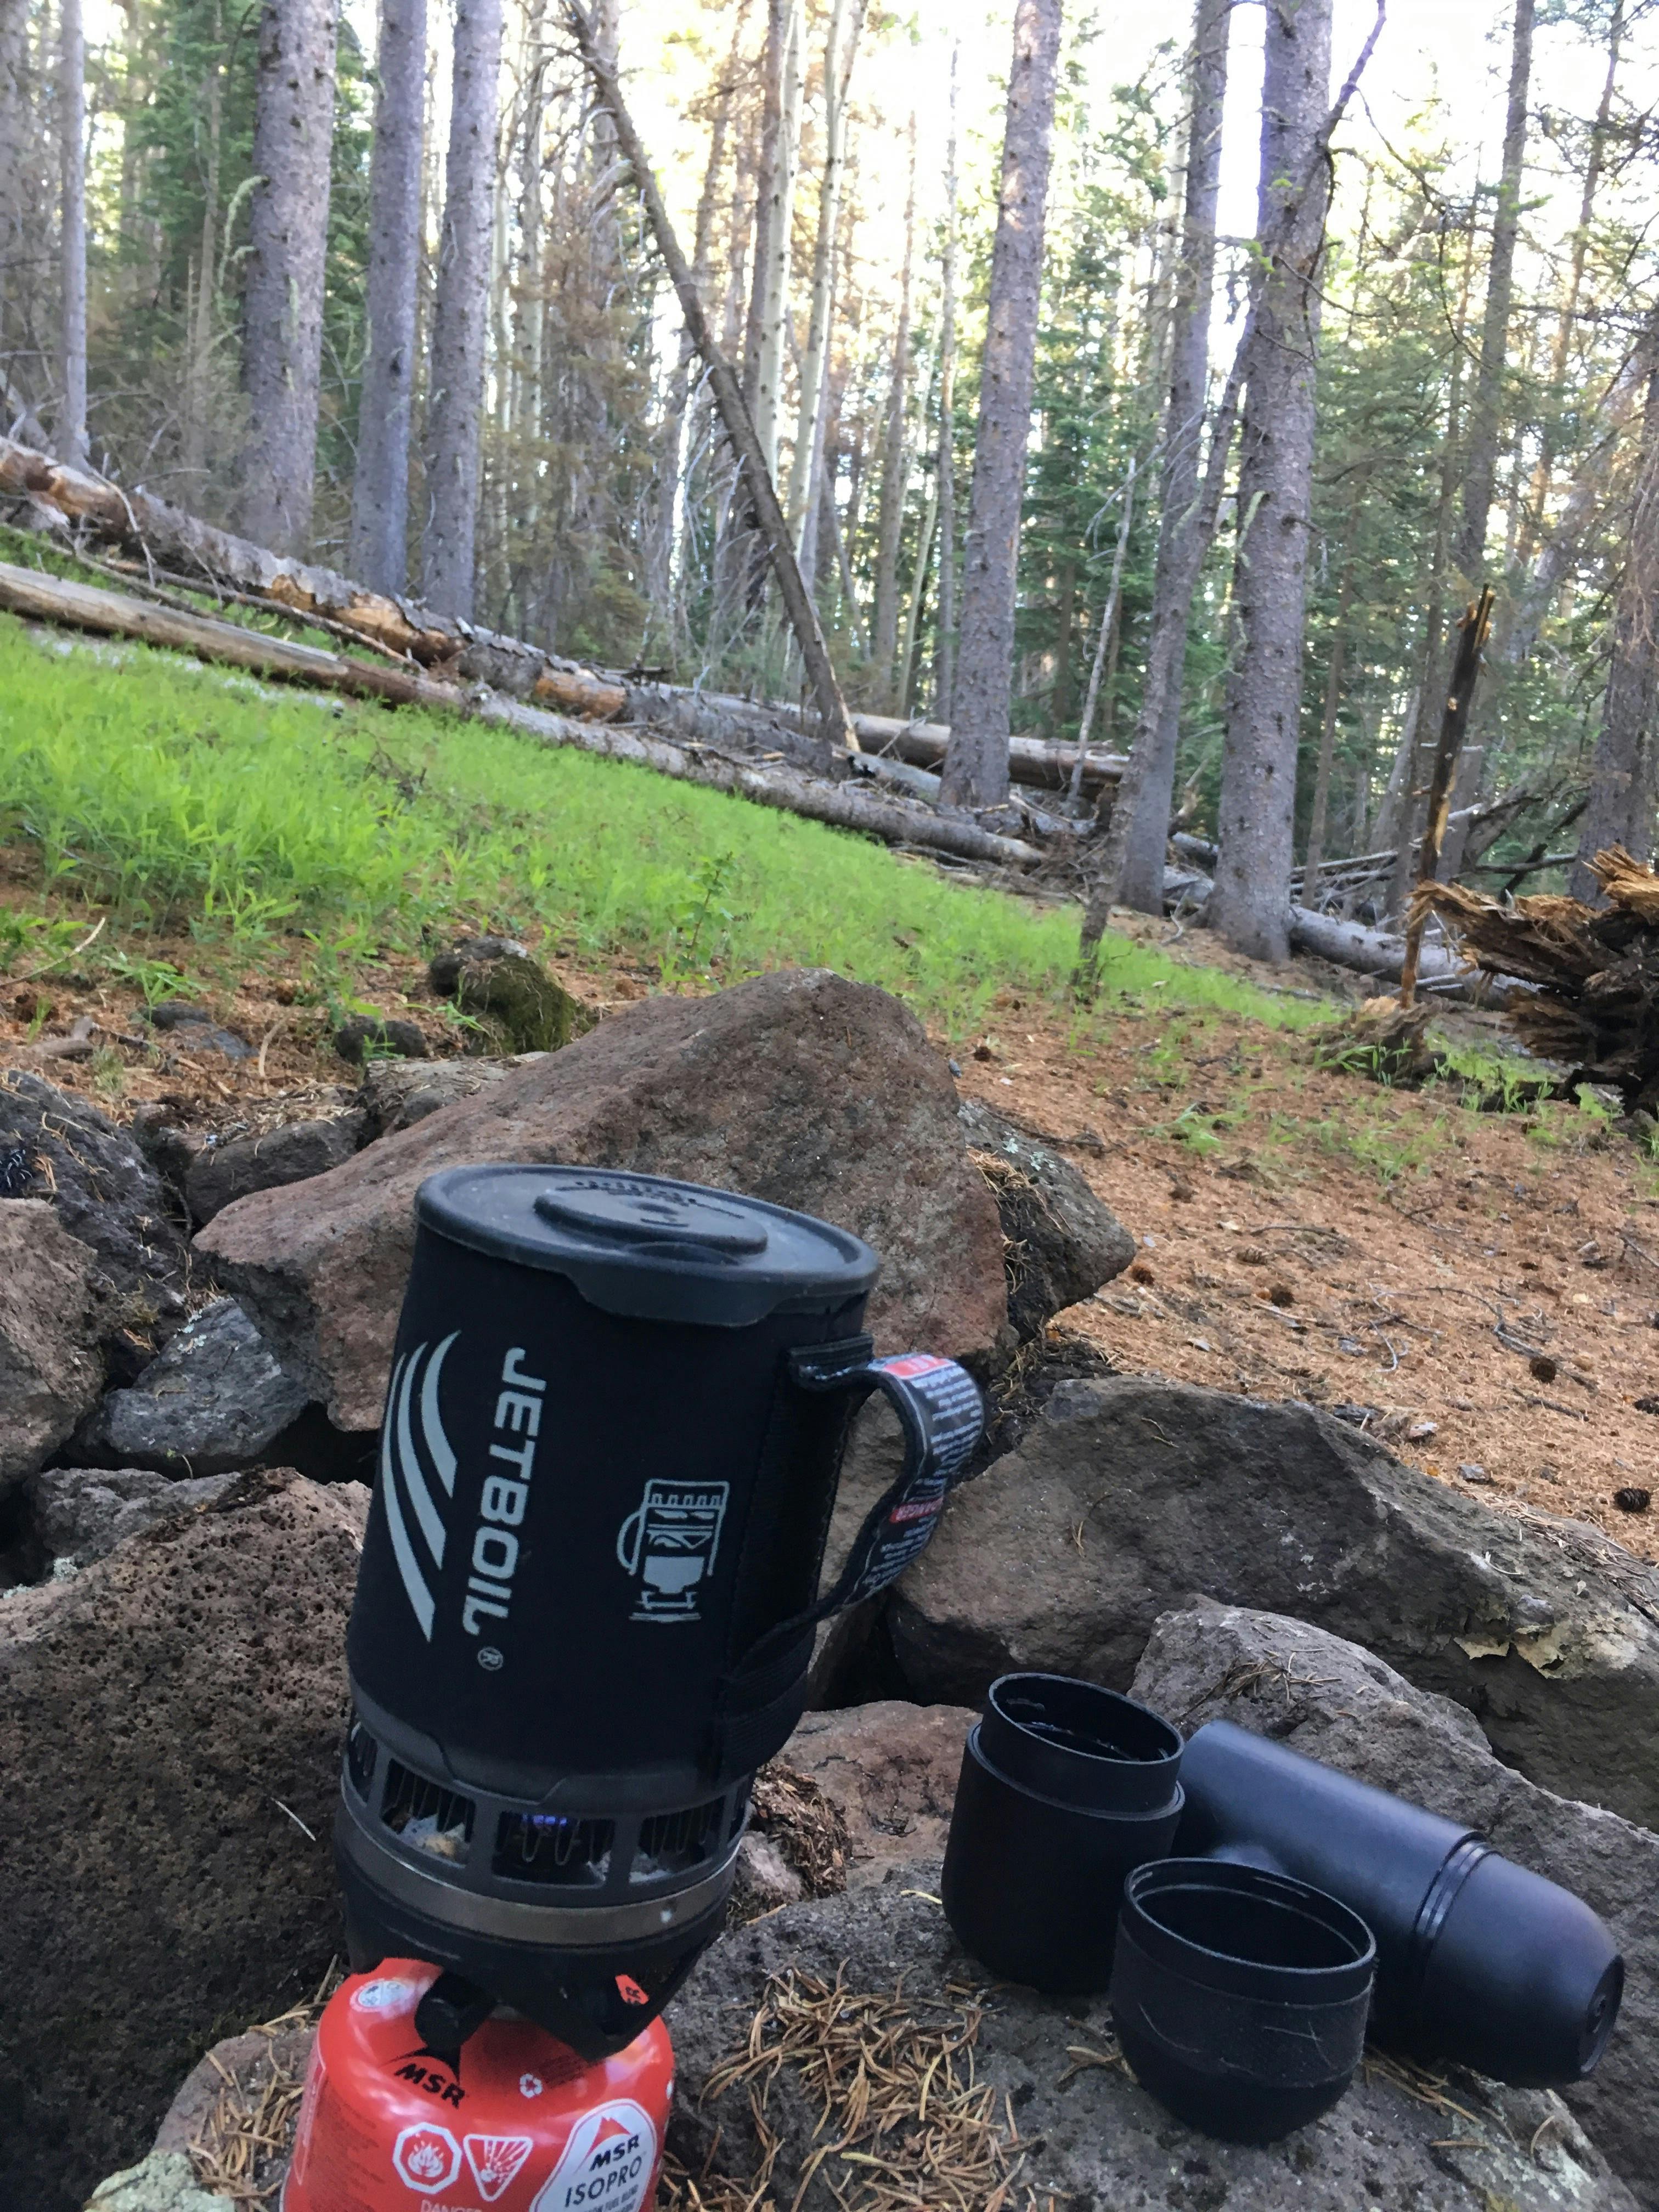 JETBOIL Flash Stove - Great Outdoor Shop